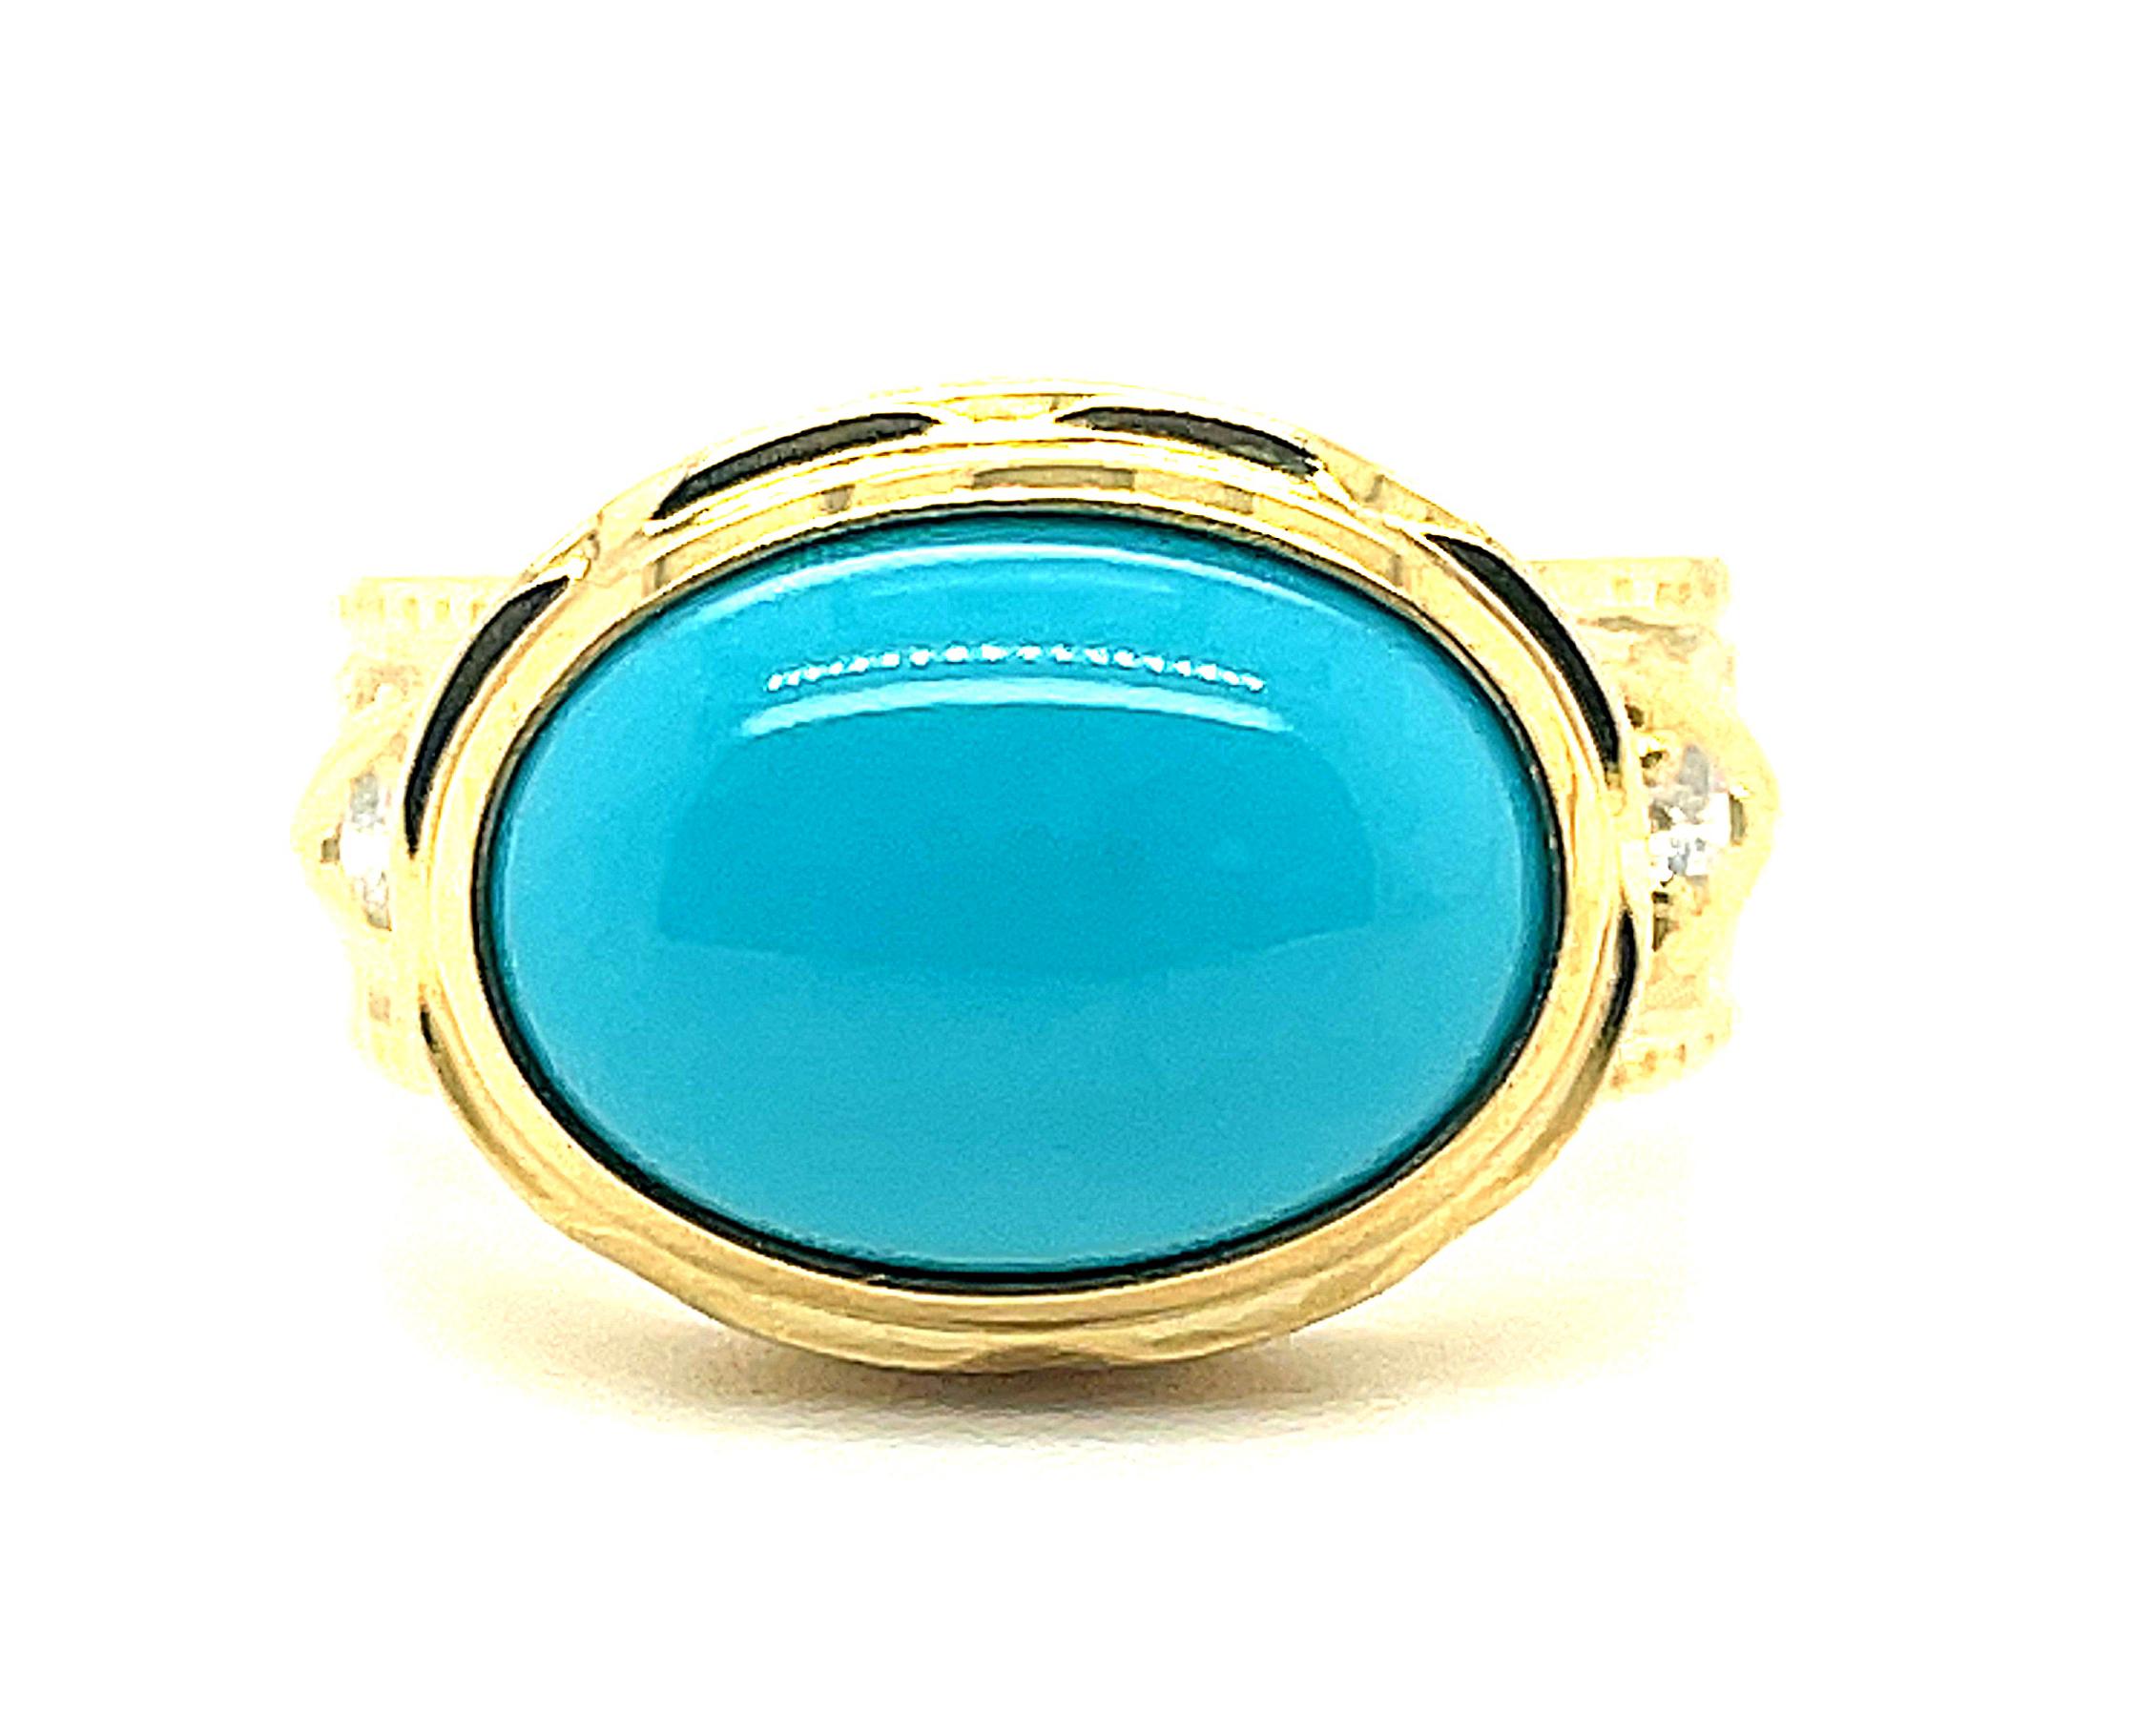 This handsome 18k yellow gold band ring features a gorgeous 3.56 carat oval turquoise cabochon from the famous Sleeping Beauty Mine! The Sleeping Beauty Mine in Arizona is one of the most important sources of fine turquoise in the world but has been